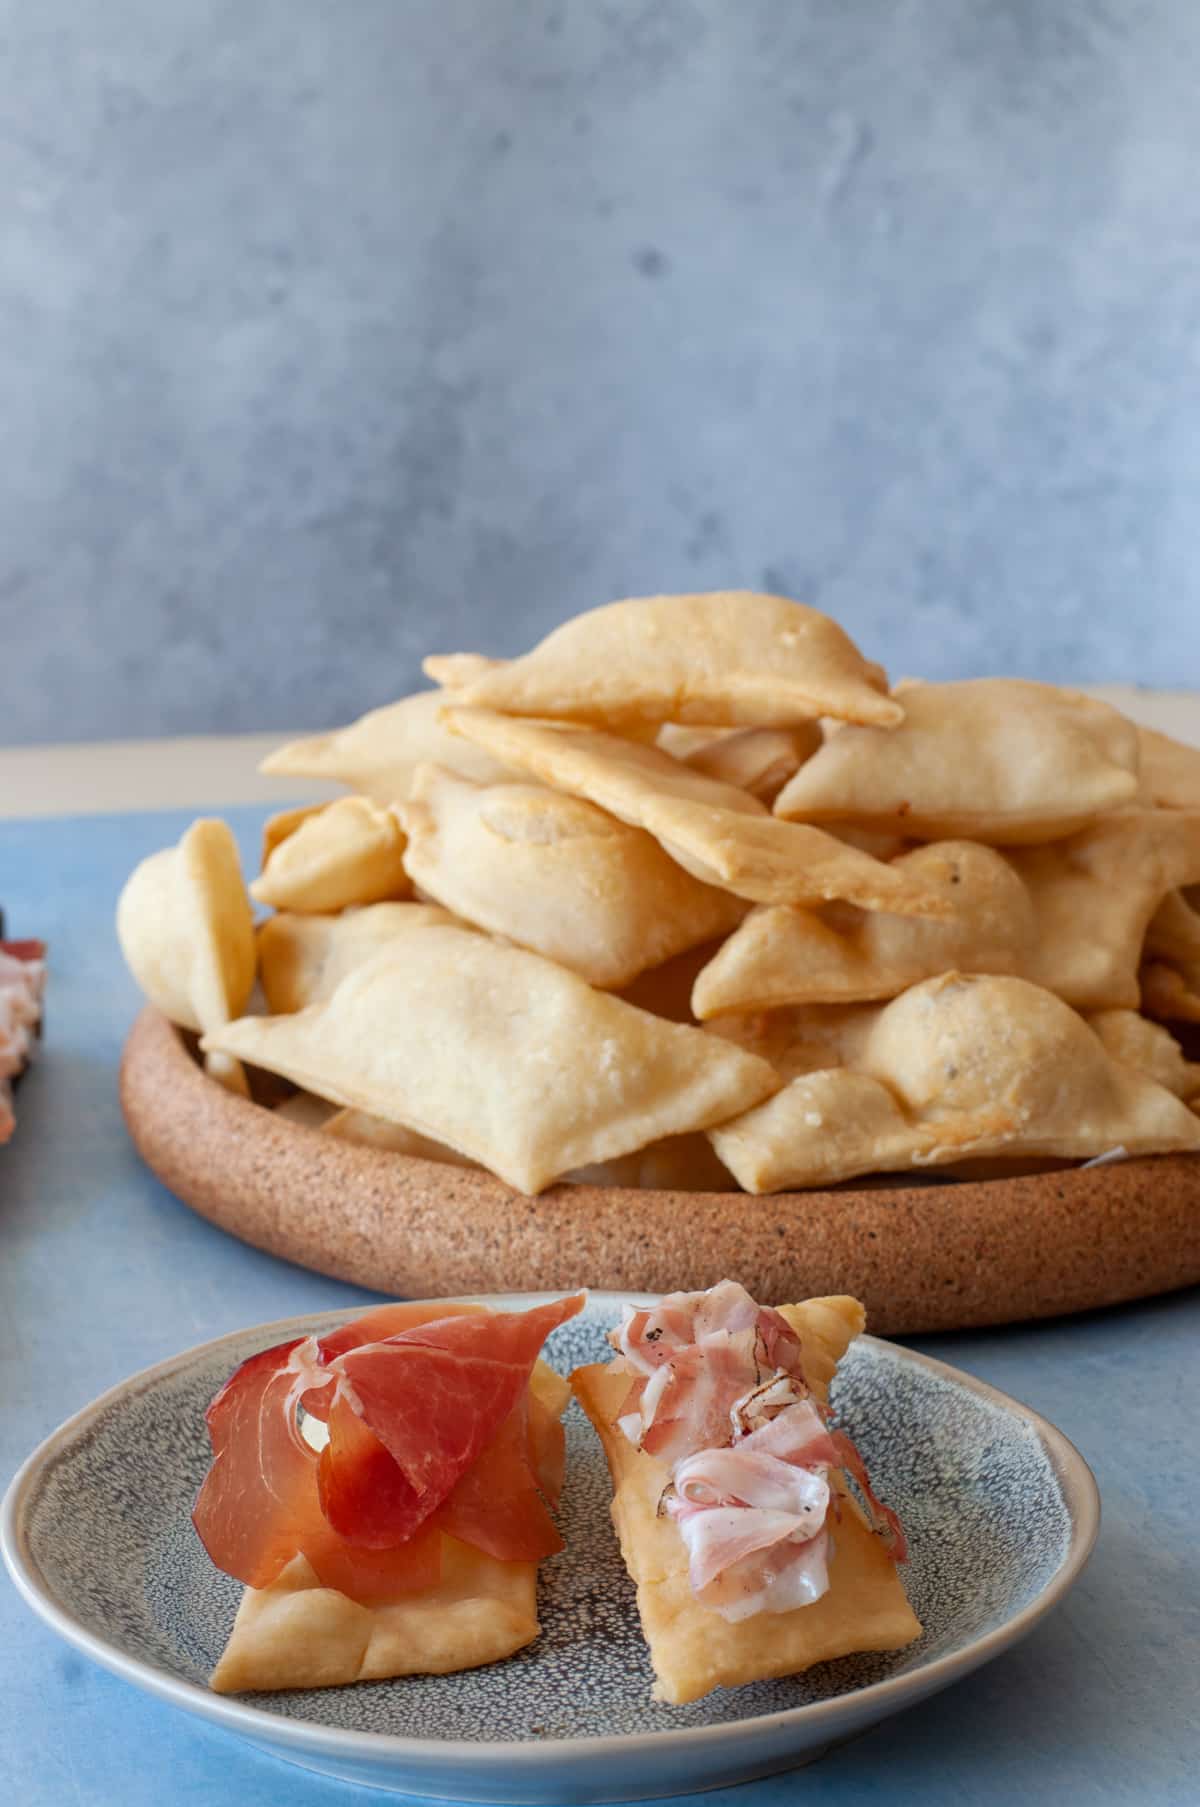 gnoccho fritto served with culatello and bacon